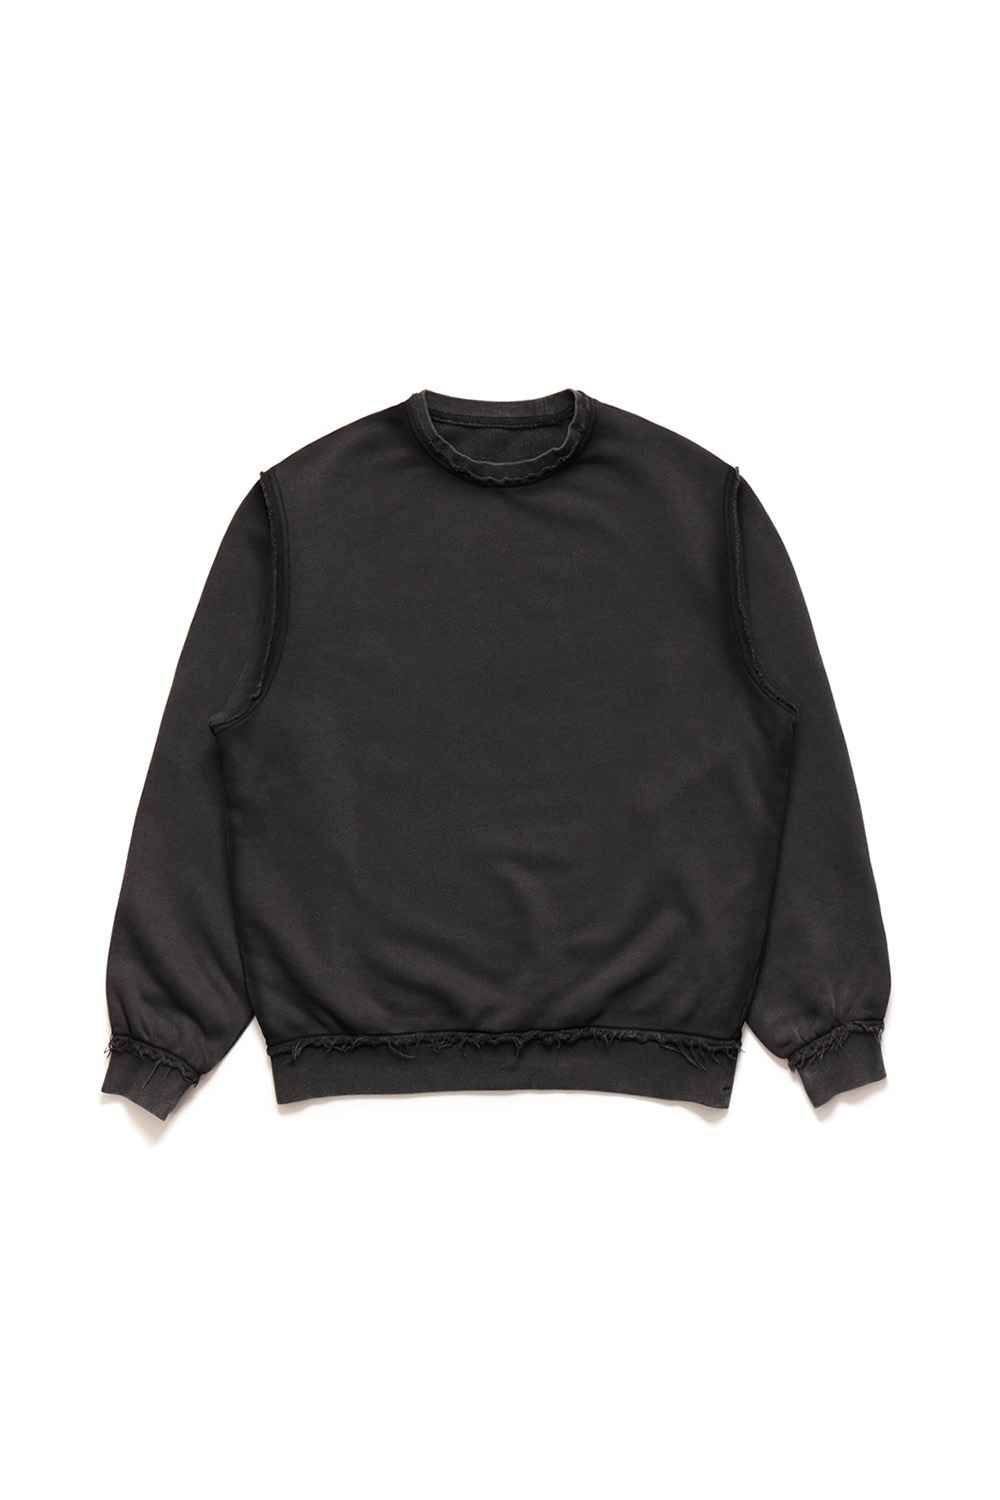 (Pre-order delivery on March 28) DESTROYED SWEAT SHIRTS/BLACK